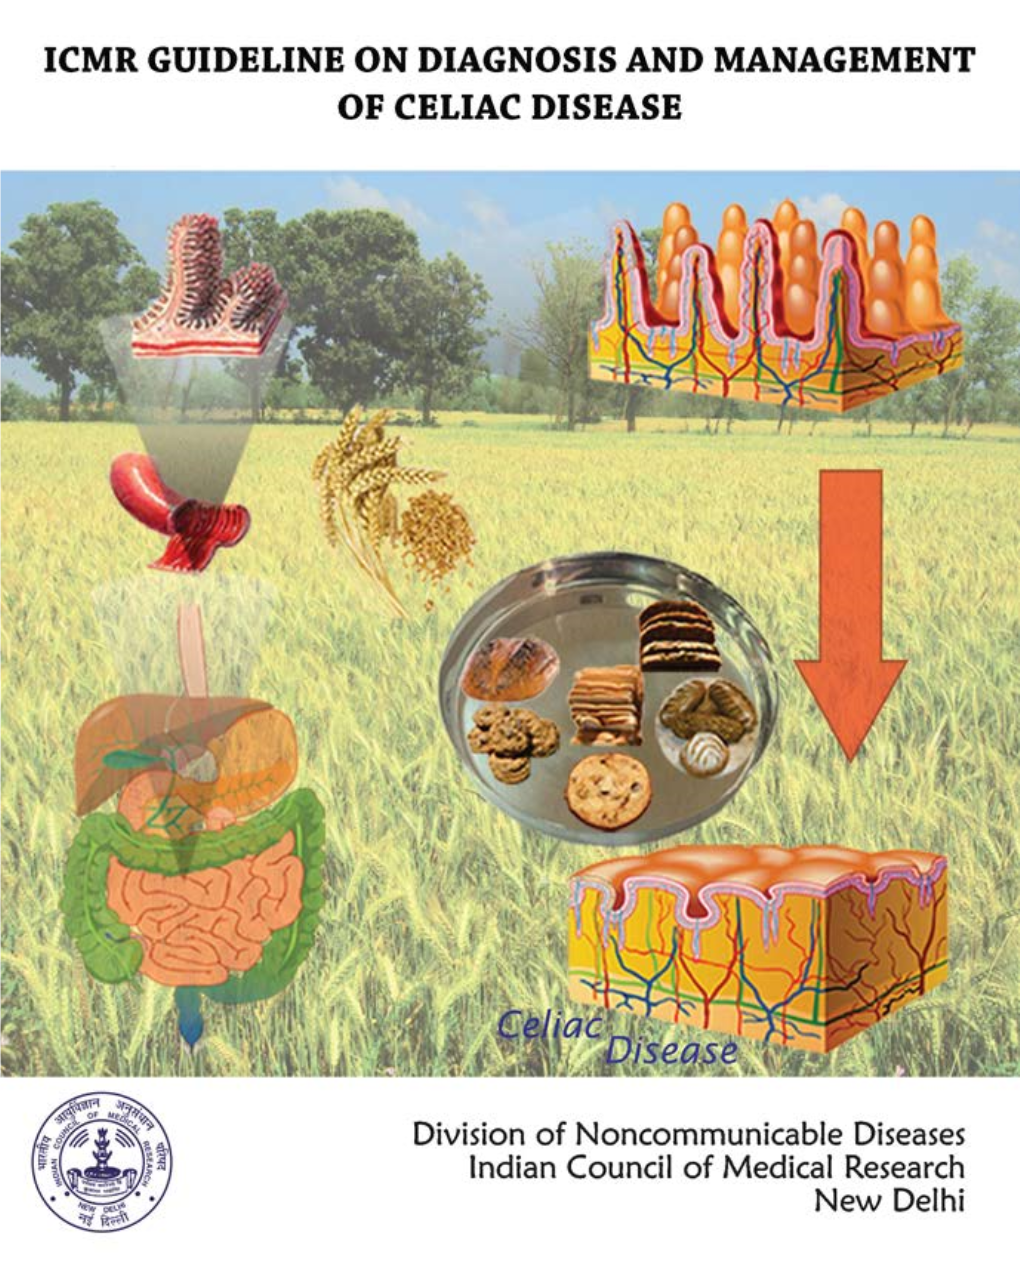 ICMR Guideline on Diagnosis and Management of Celiac Disease